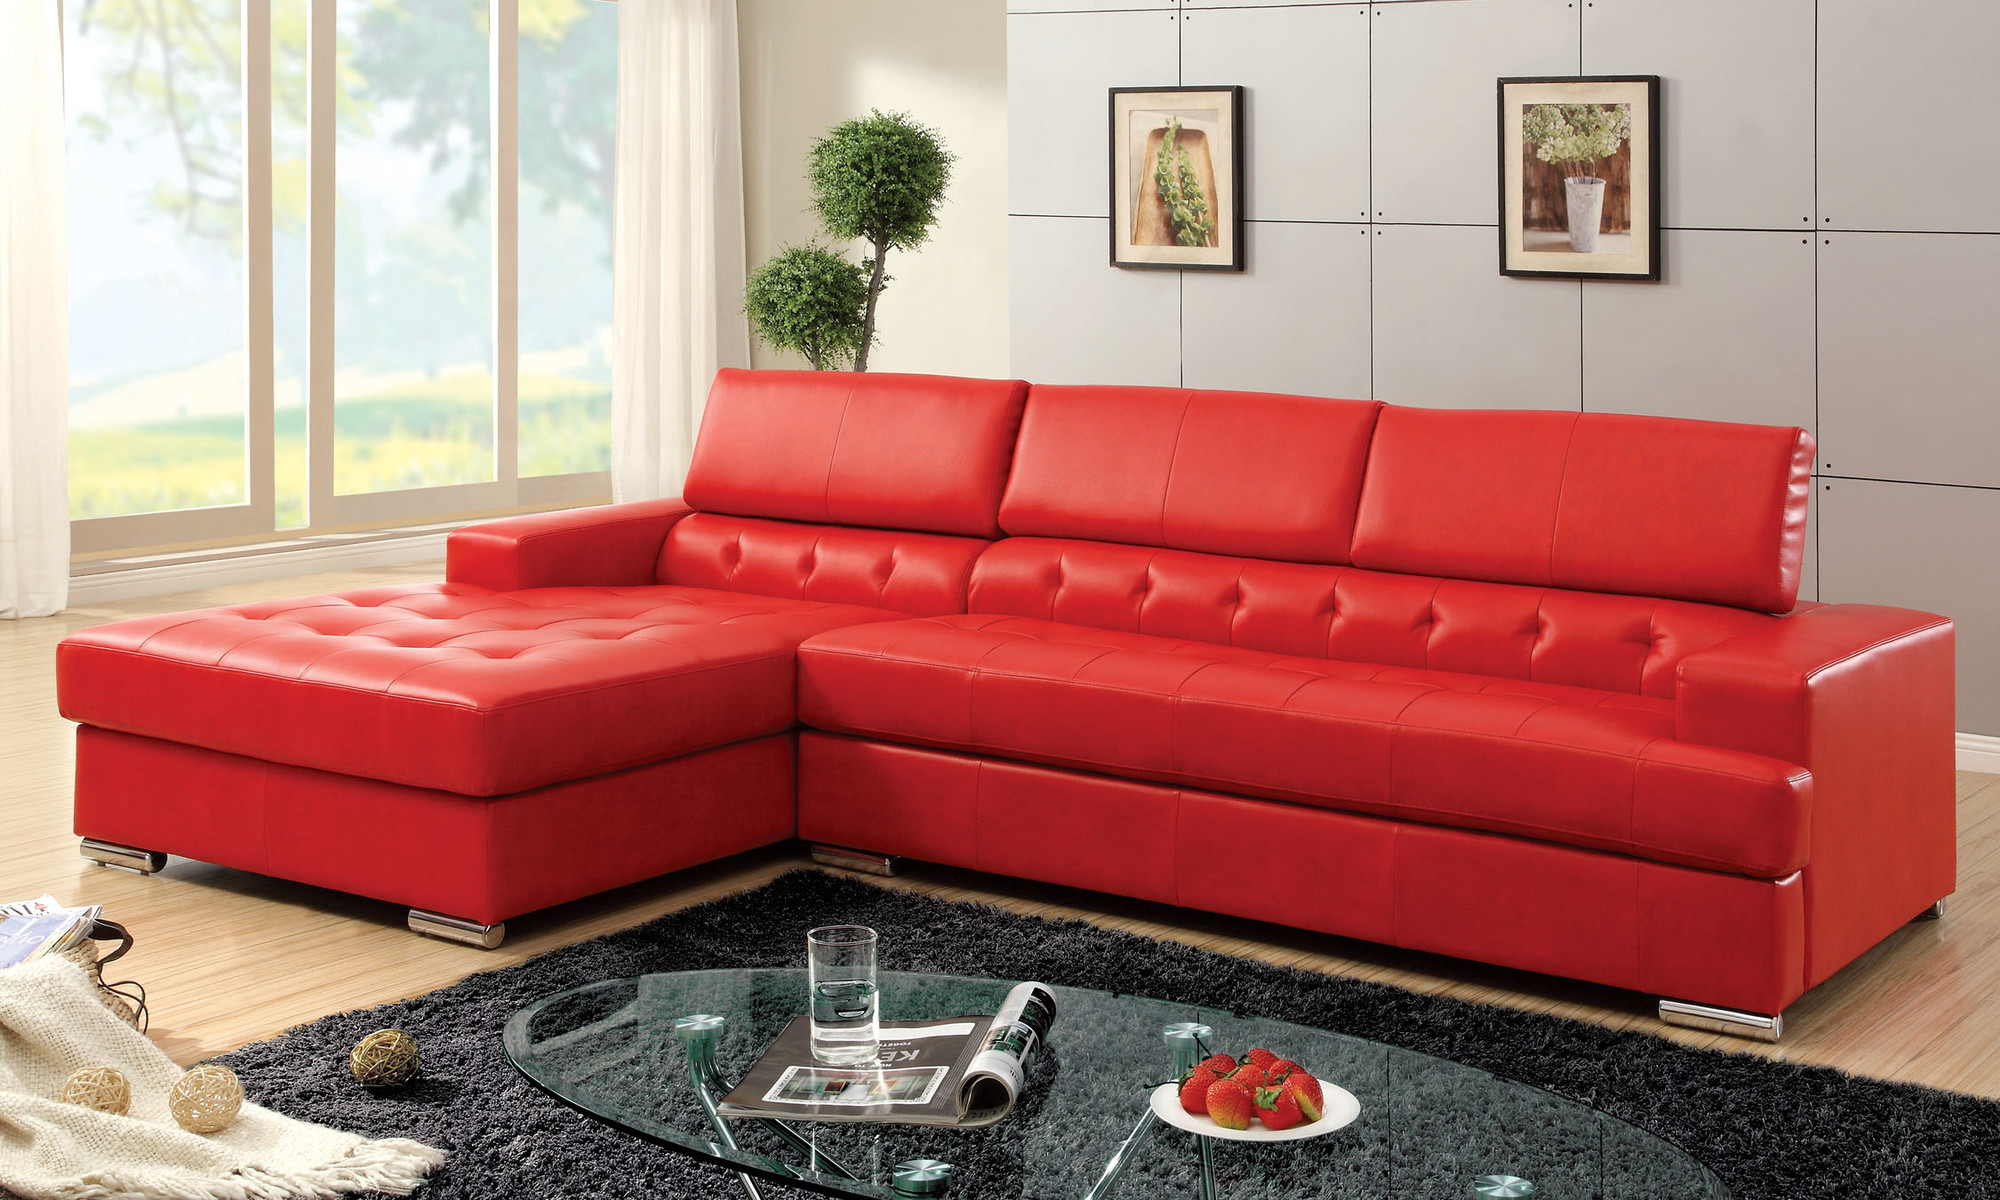 red leather sectional sofa bed